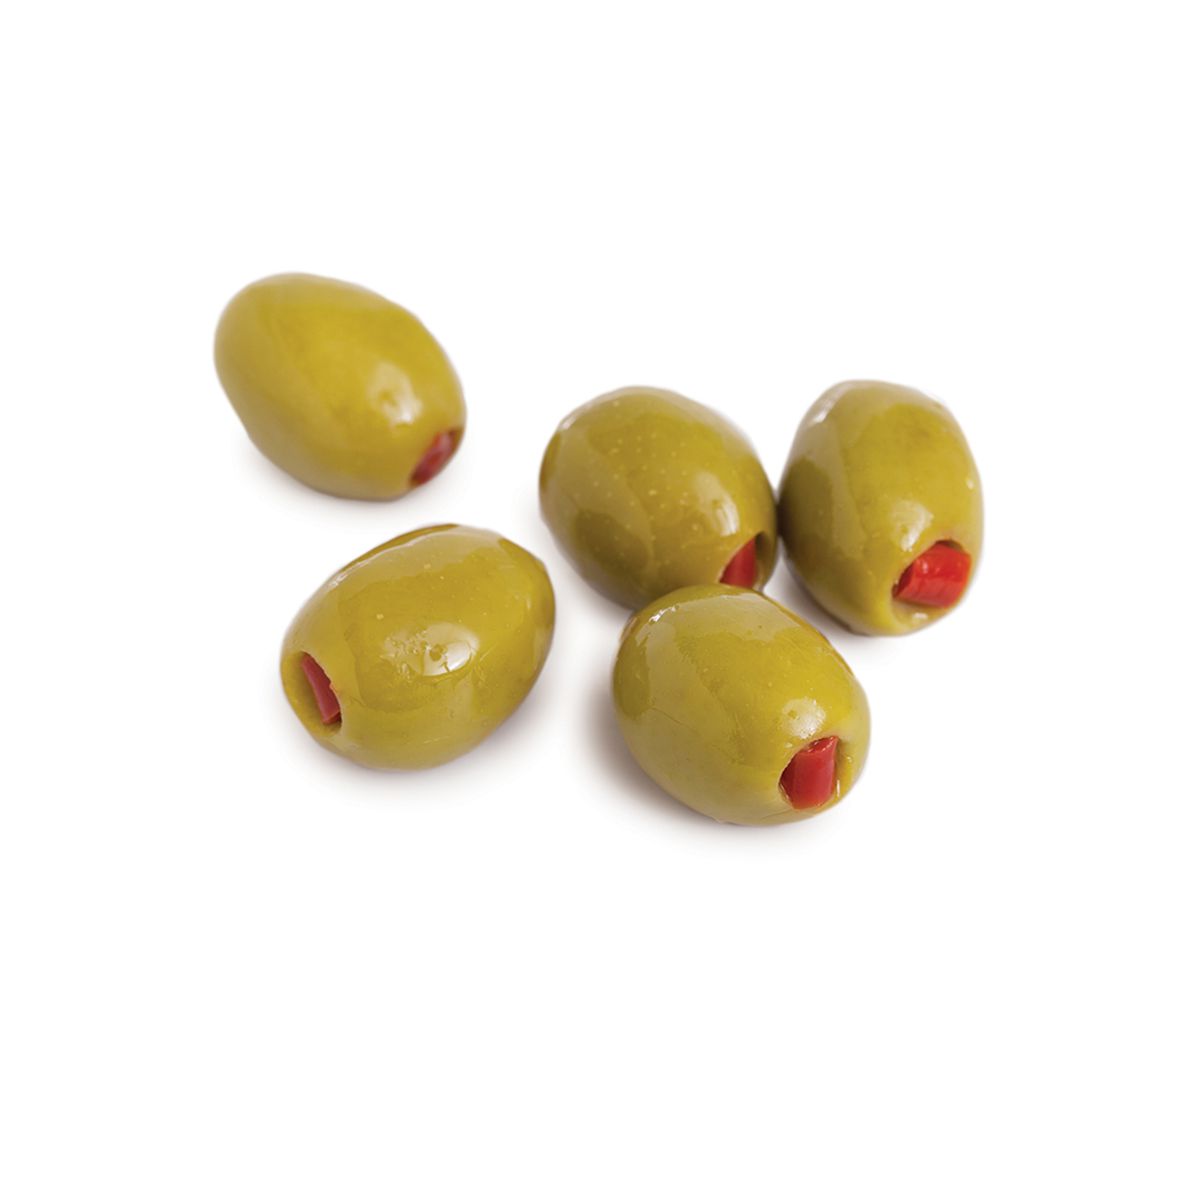 Foodmatch Divina Green Olives Stuffed with Red Pepper 5 LB